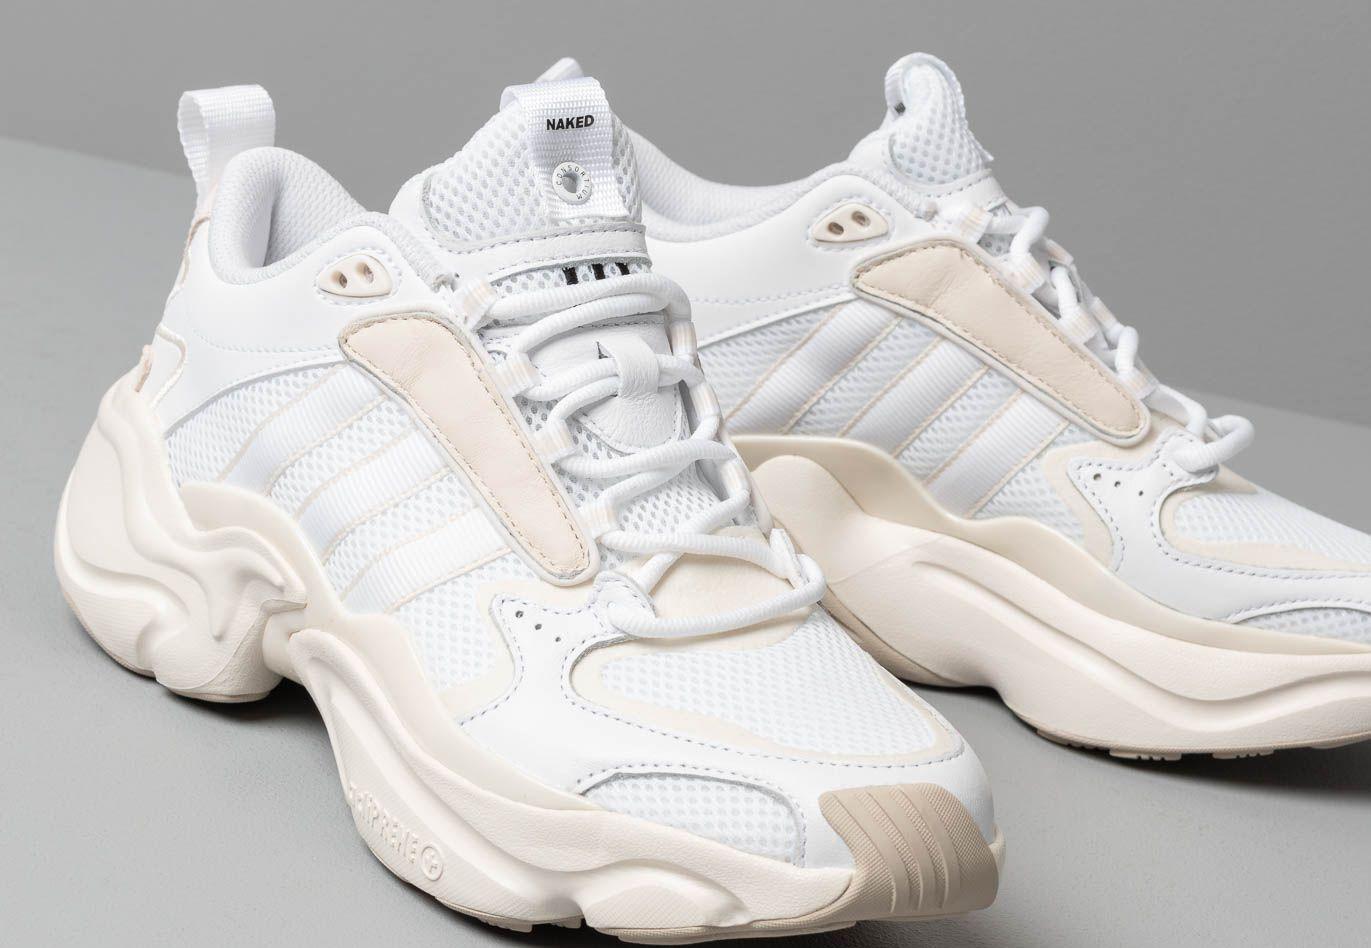 Naked x adidas magmur runner  where to buy today